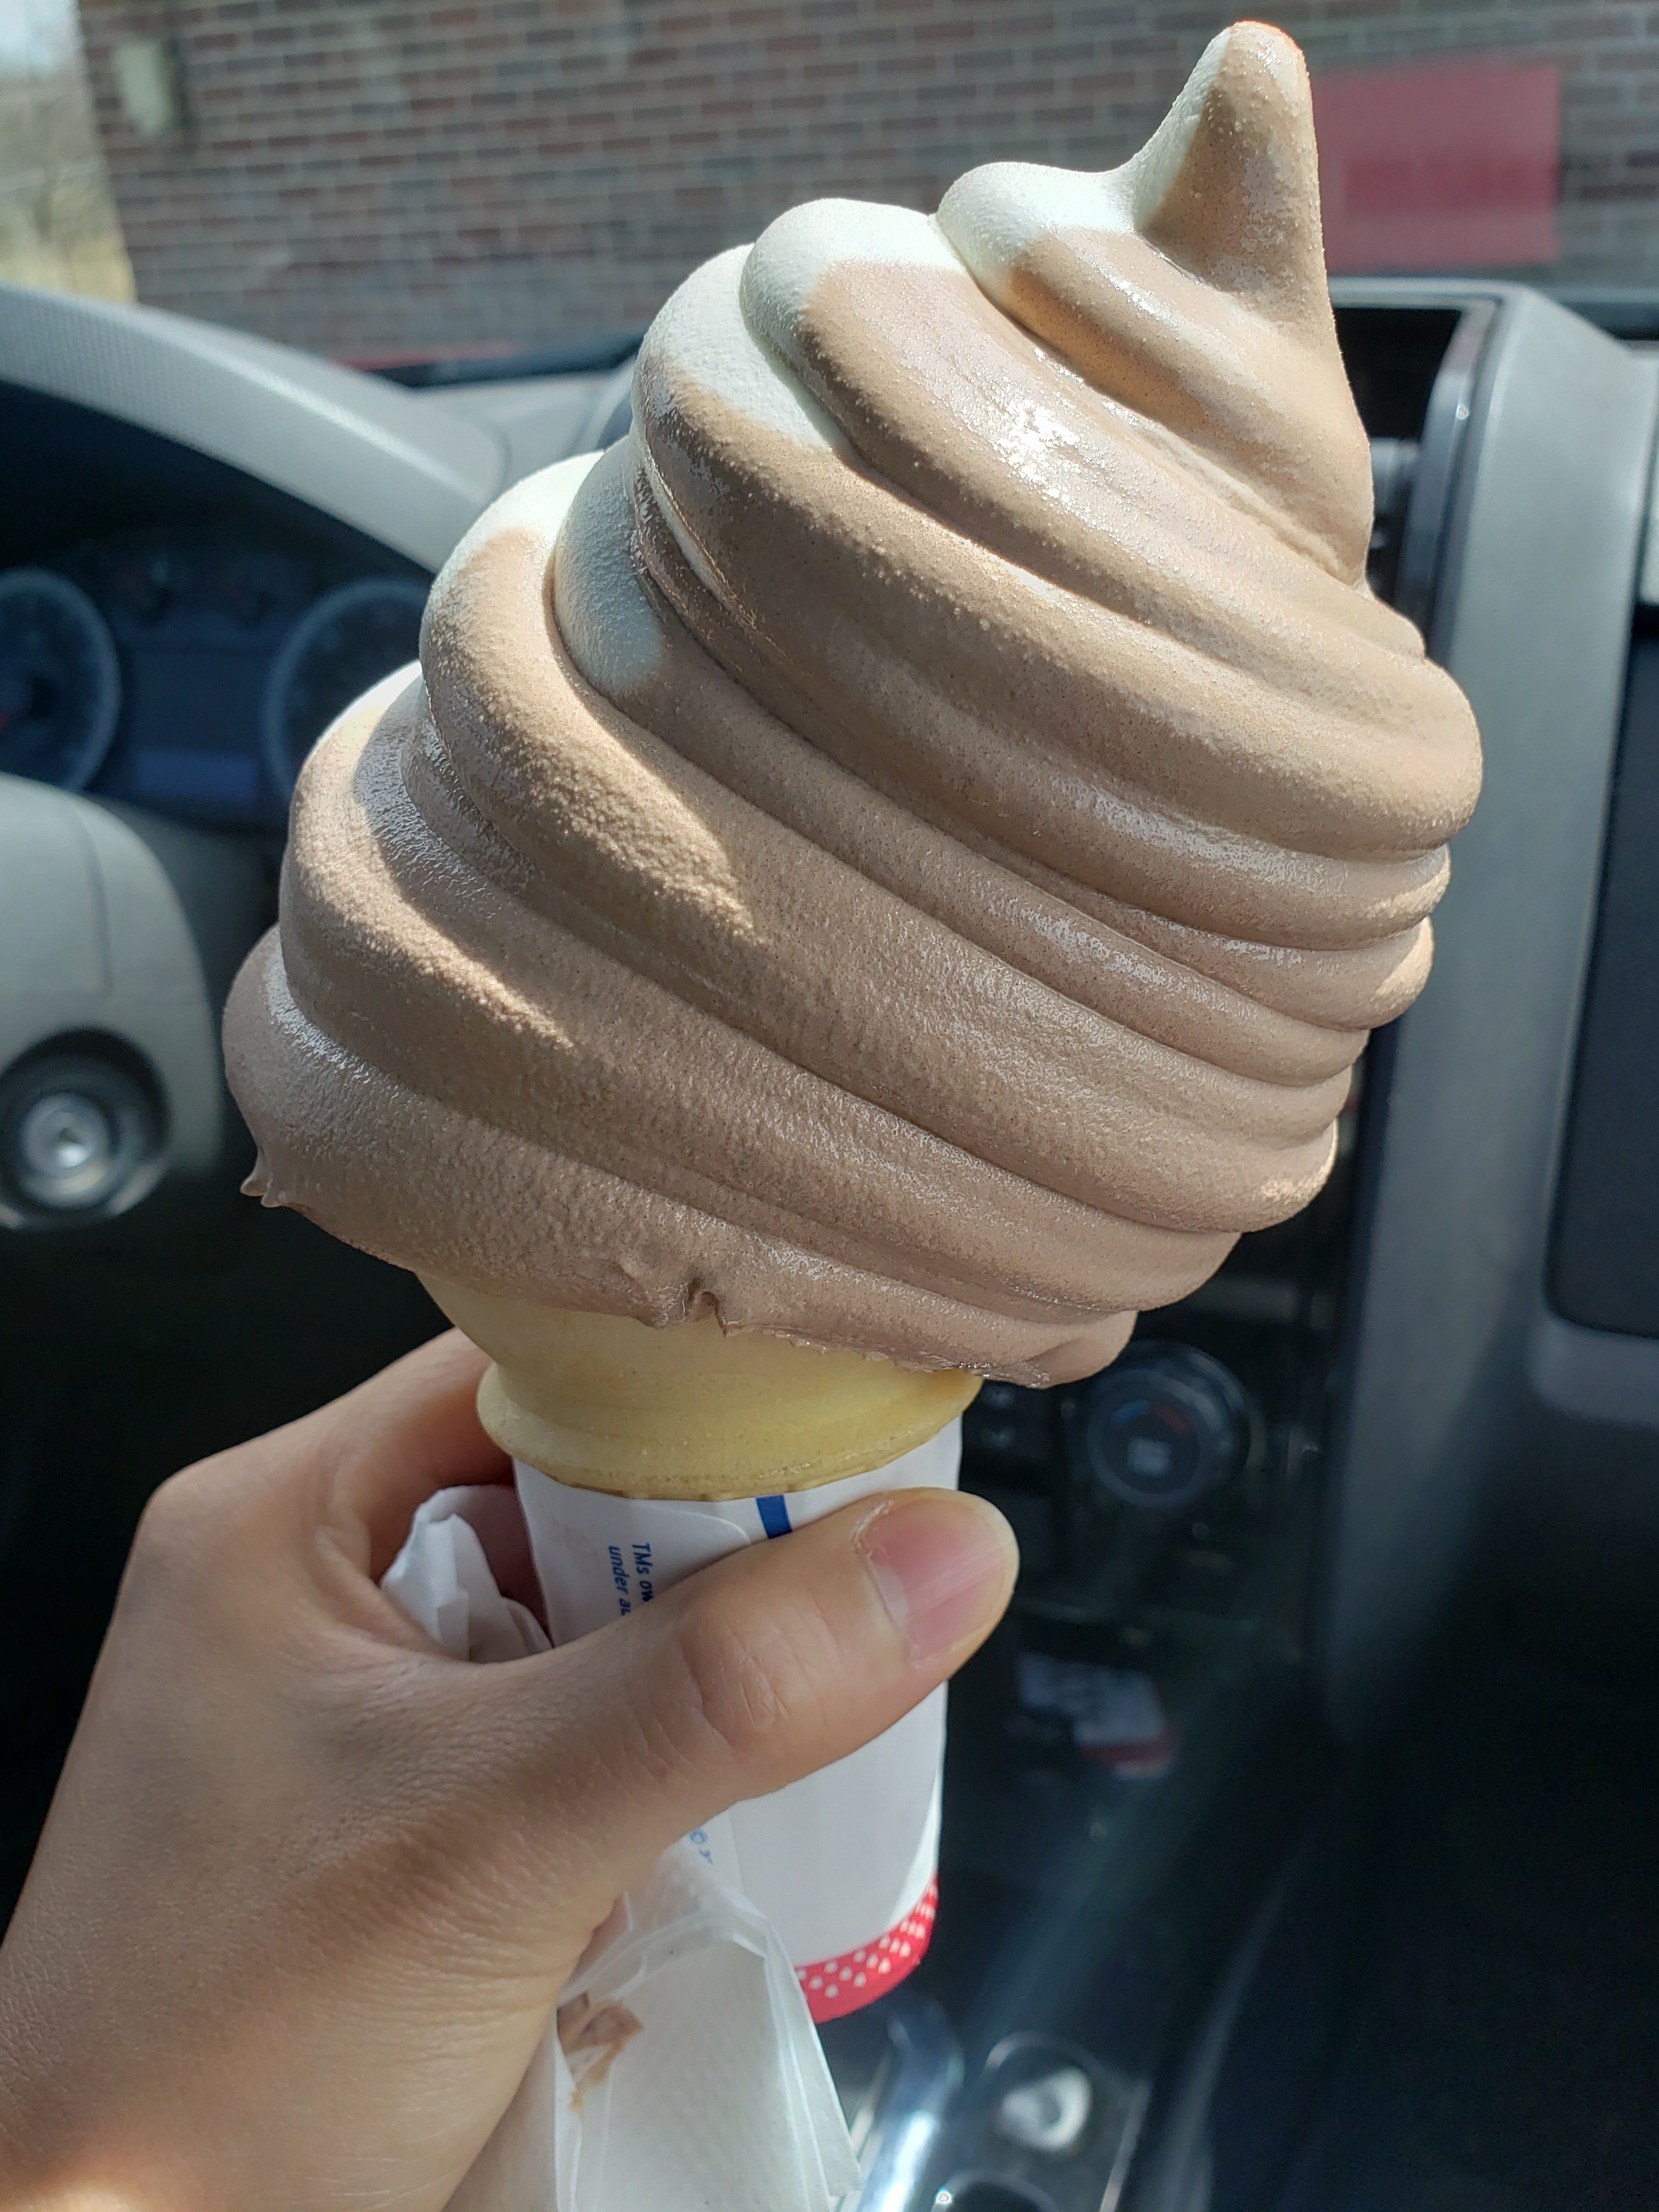 Ordered a medium twist cone. Was not disappointed...